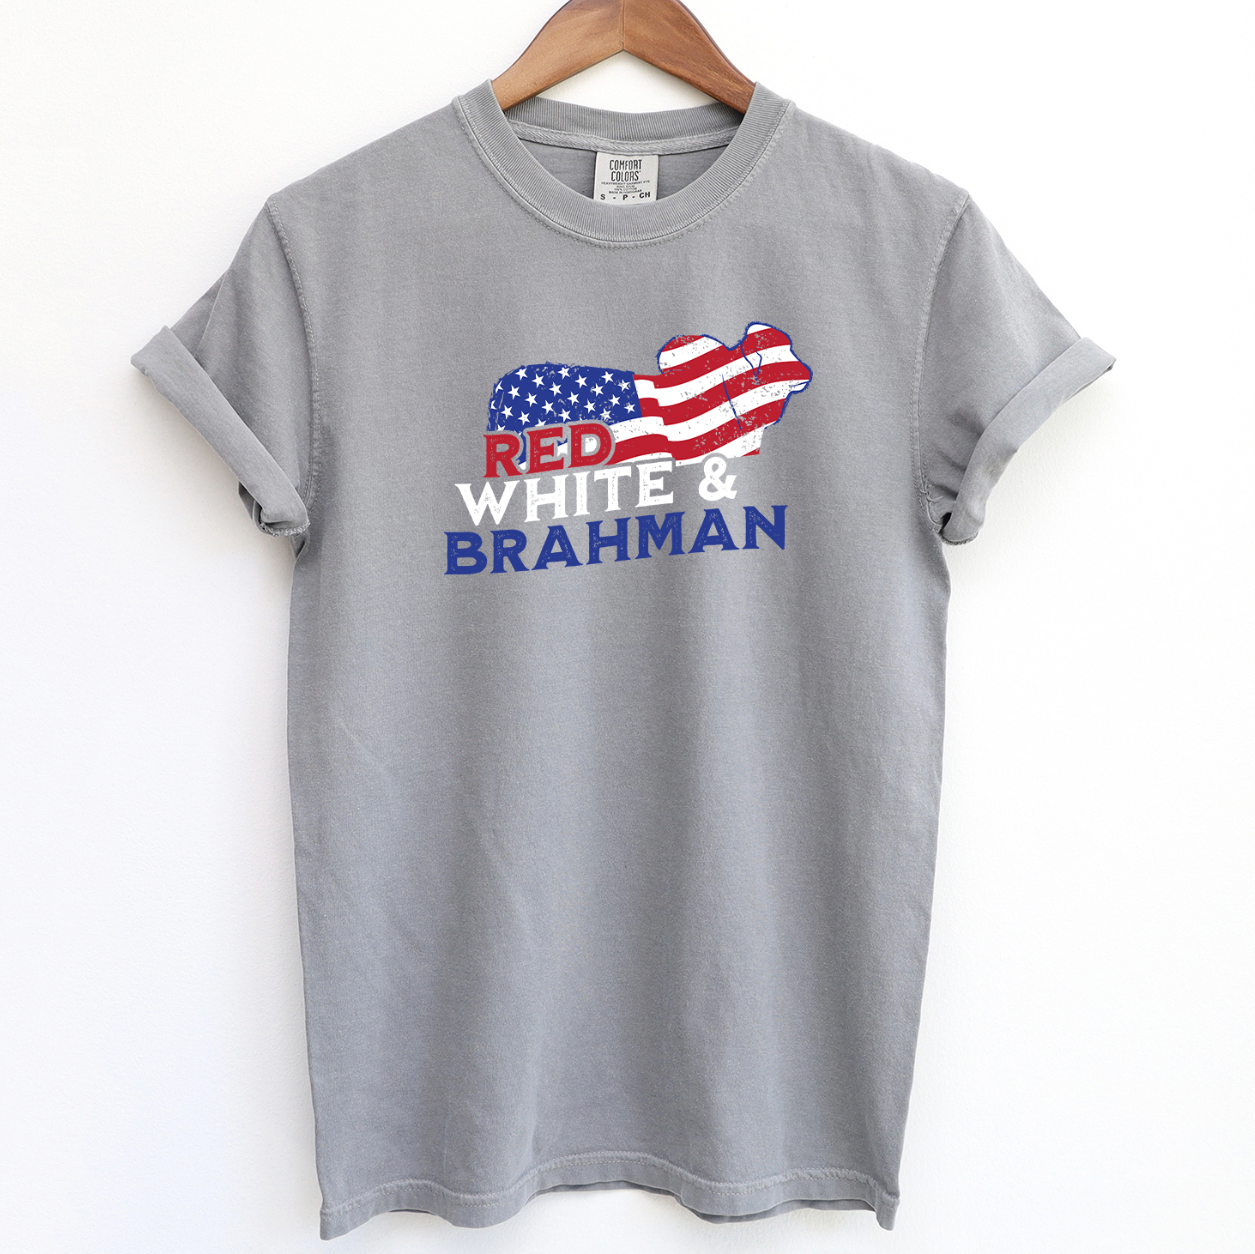 Red White and Brahman ComfortWash/ComfortColor T-Shirt (S-4XL) - Multiple Colors!